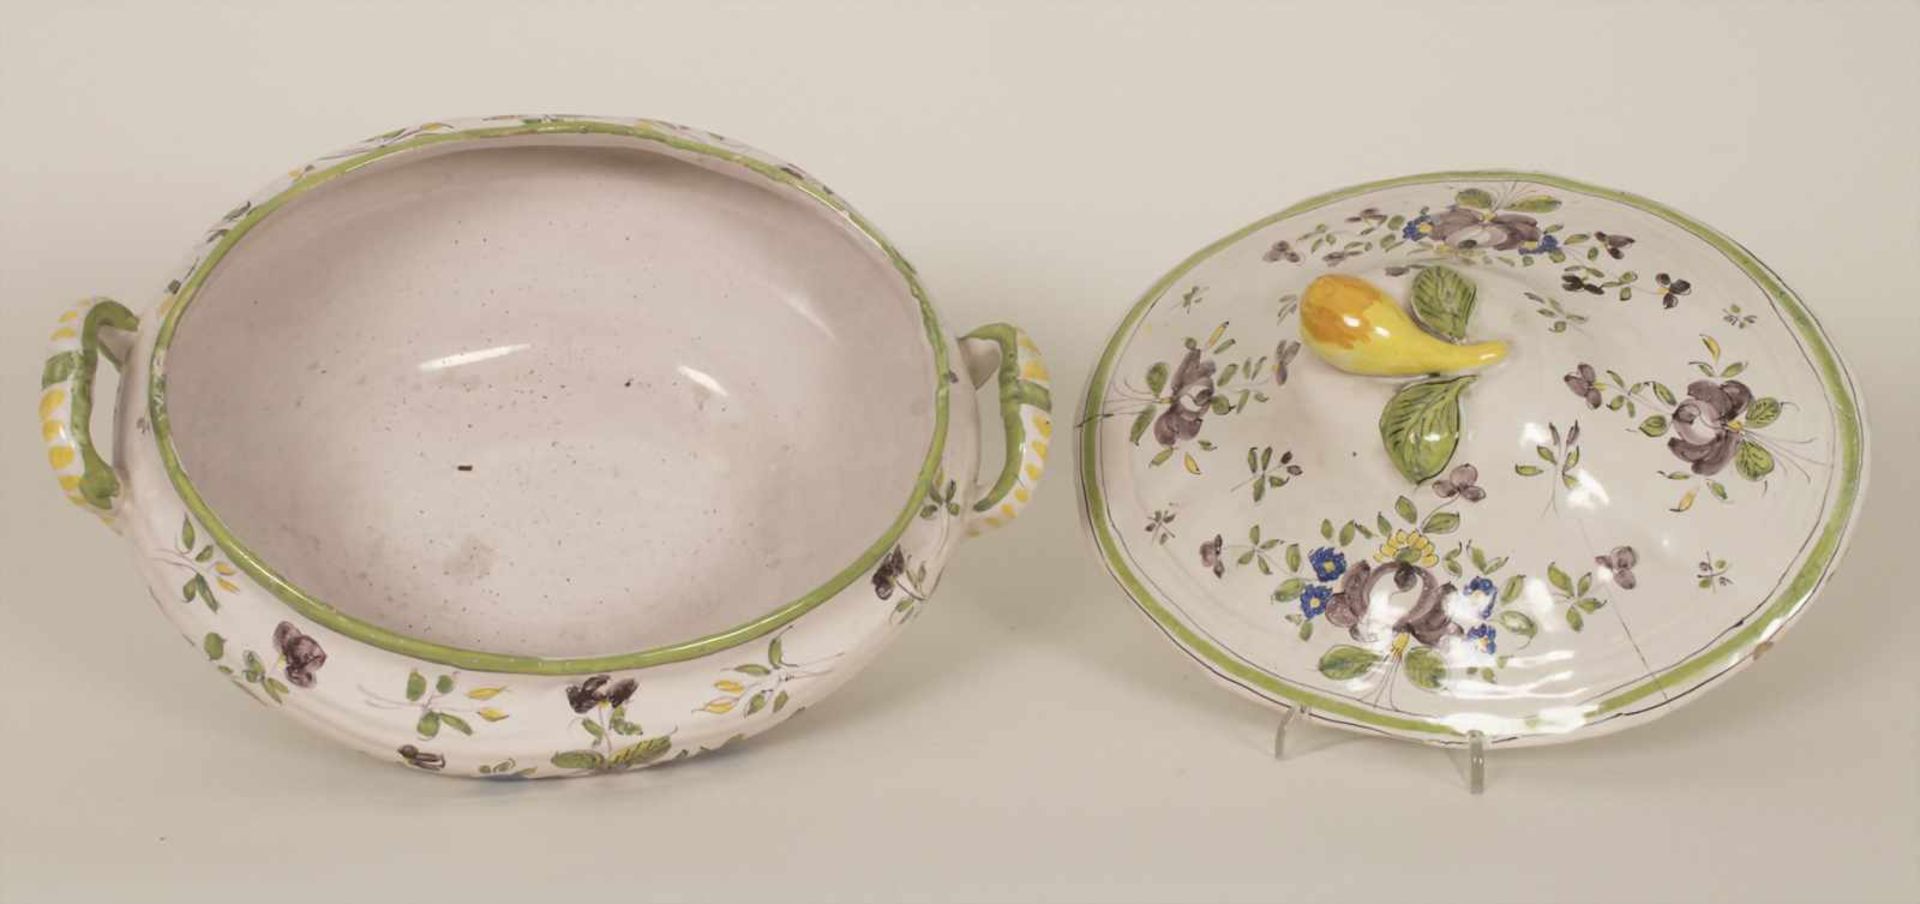 Fayence-Deckelterinne / A faience covered tureen, 18./19. Jh.Material: Keramik, floral polychrom - Bild 5 aus 8